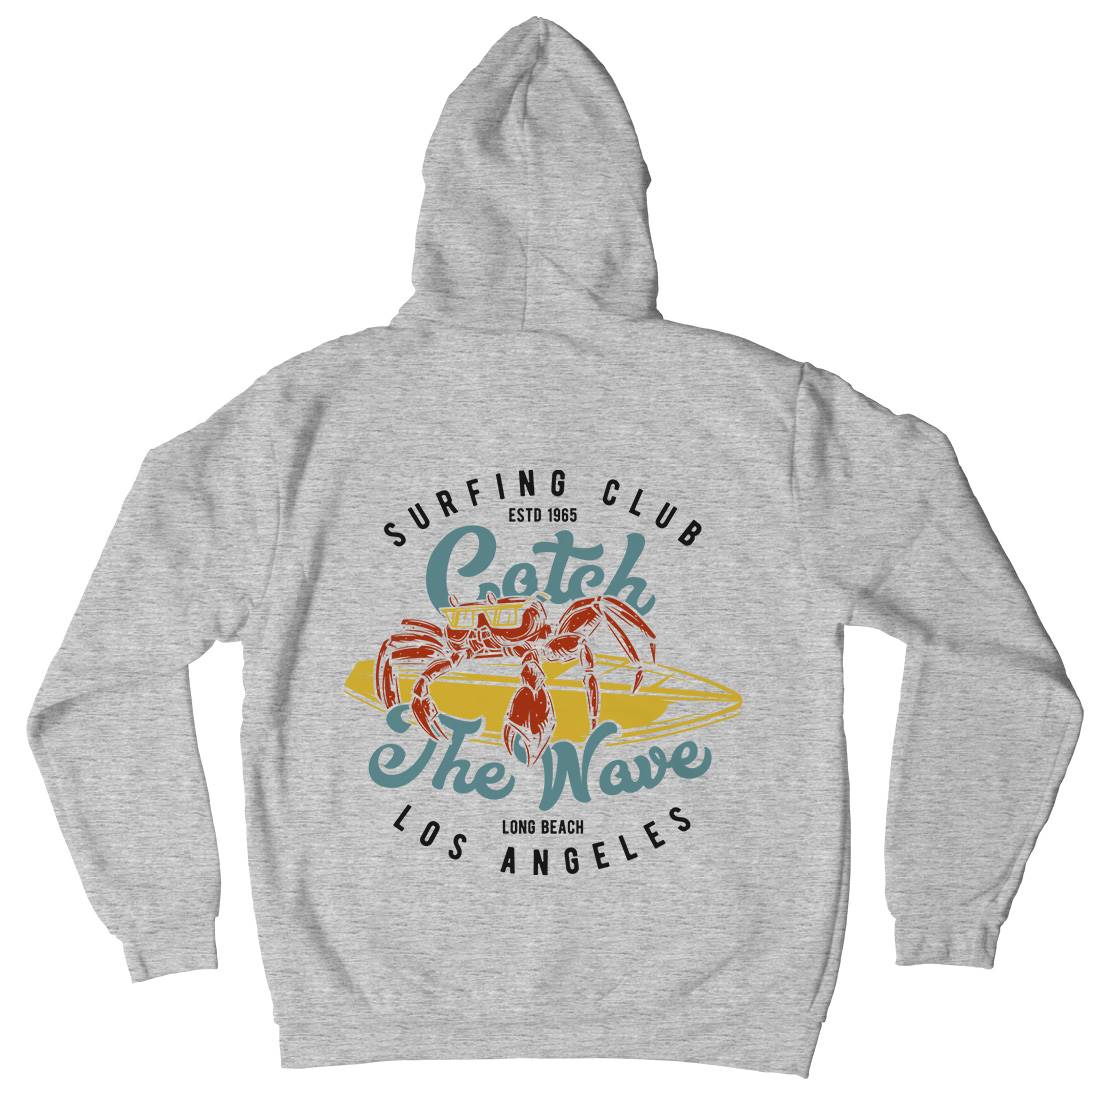 Catch The Wave Surfing Mens Hoodie With Pocket Surf B877